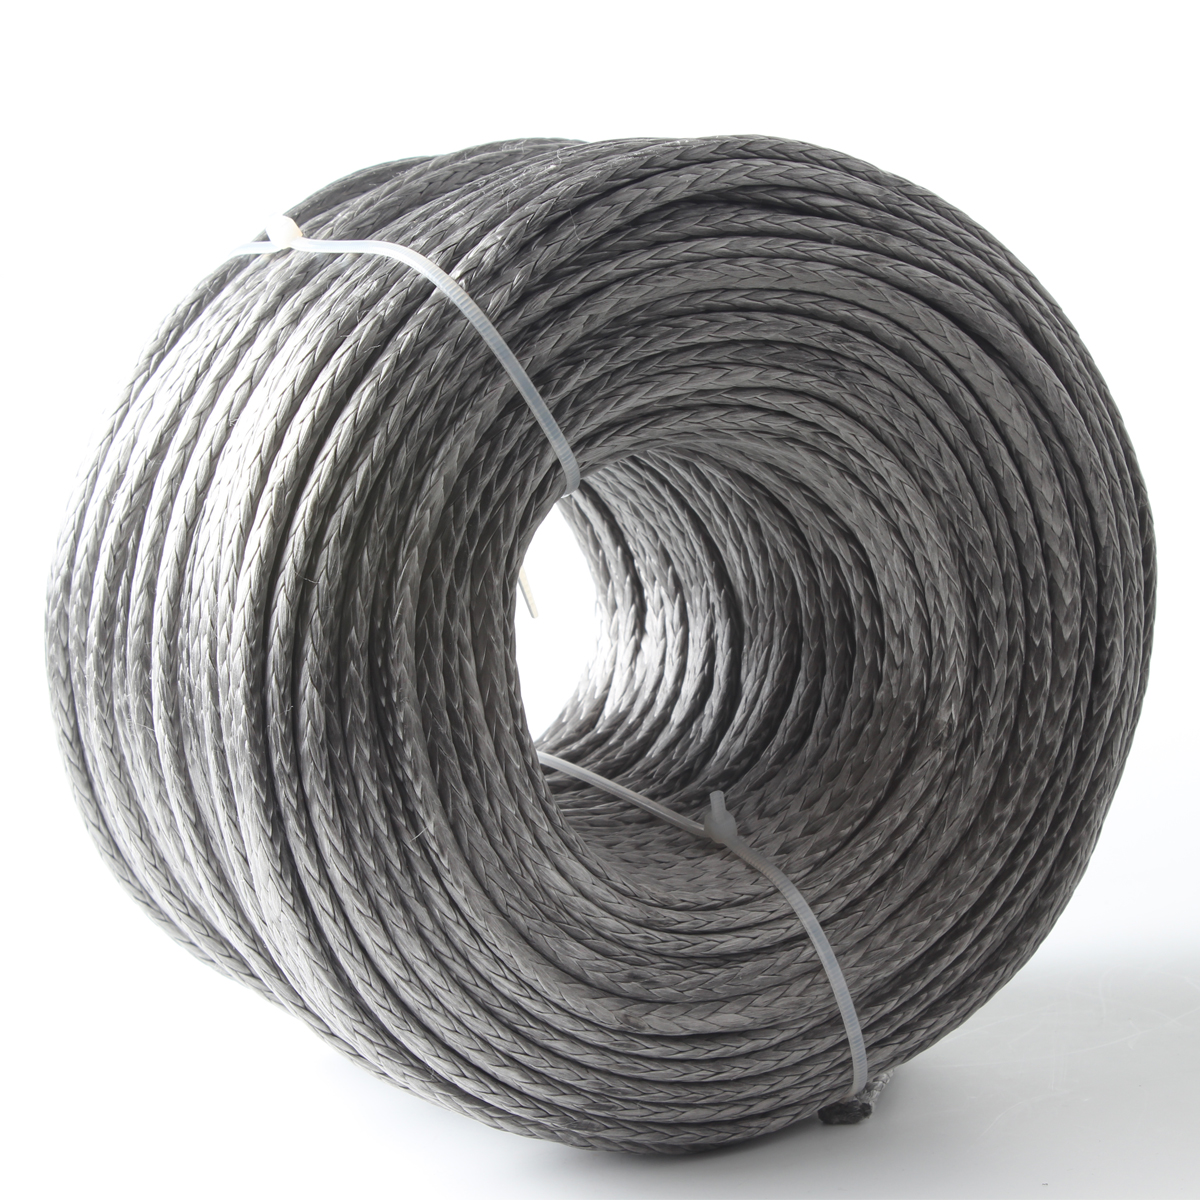 4mm 5/32" UHMWPE hang glider towing winch rope